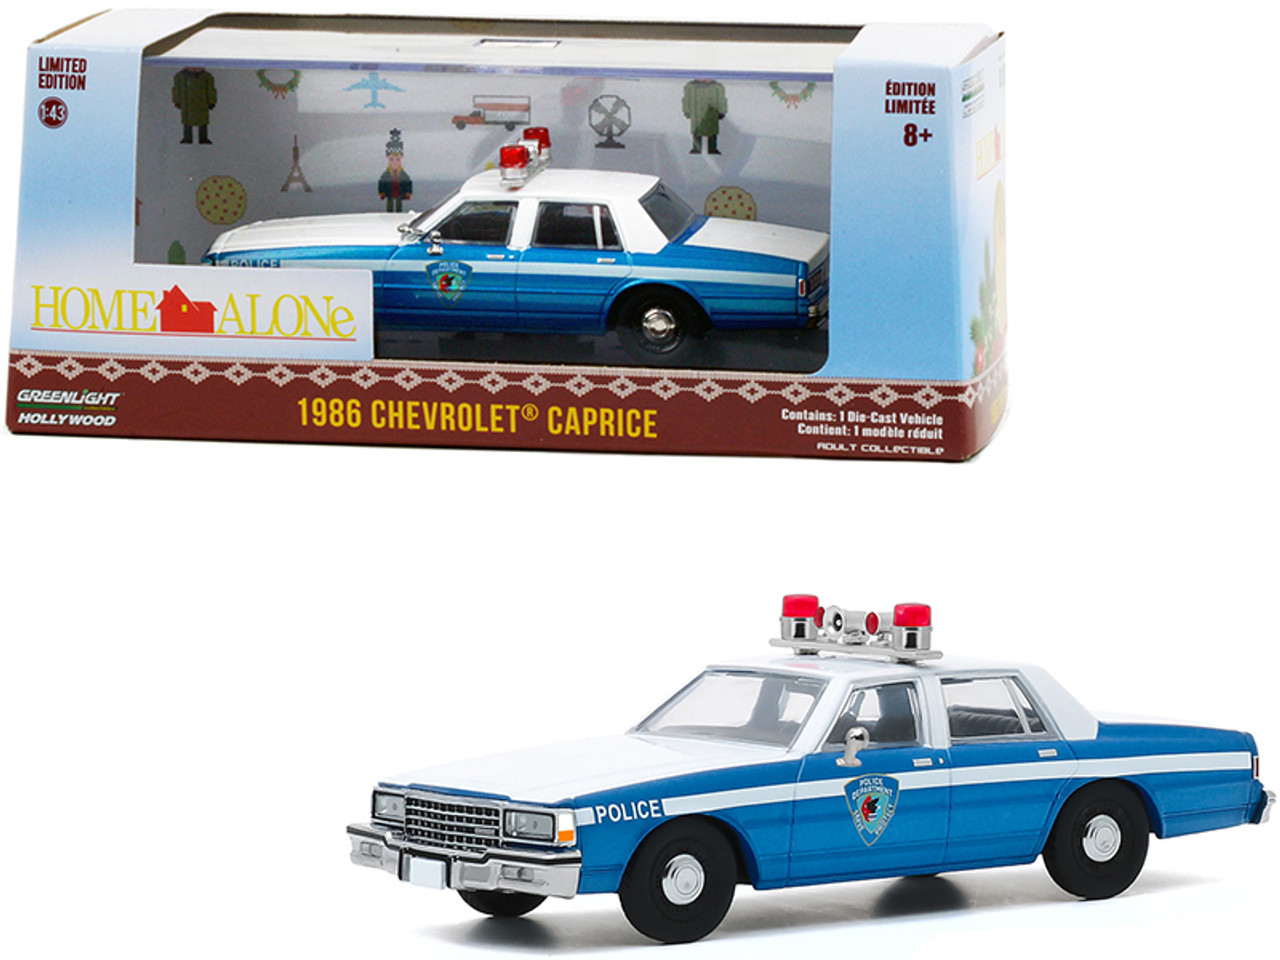 1986 Chevrolet Caprice Blue and White Police Car "Home Alone" (1990) Movie 1/43 Diecast Model Car by Greenlight